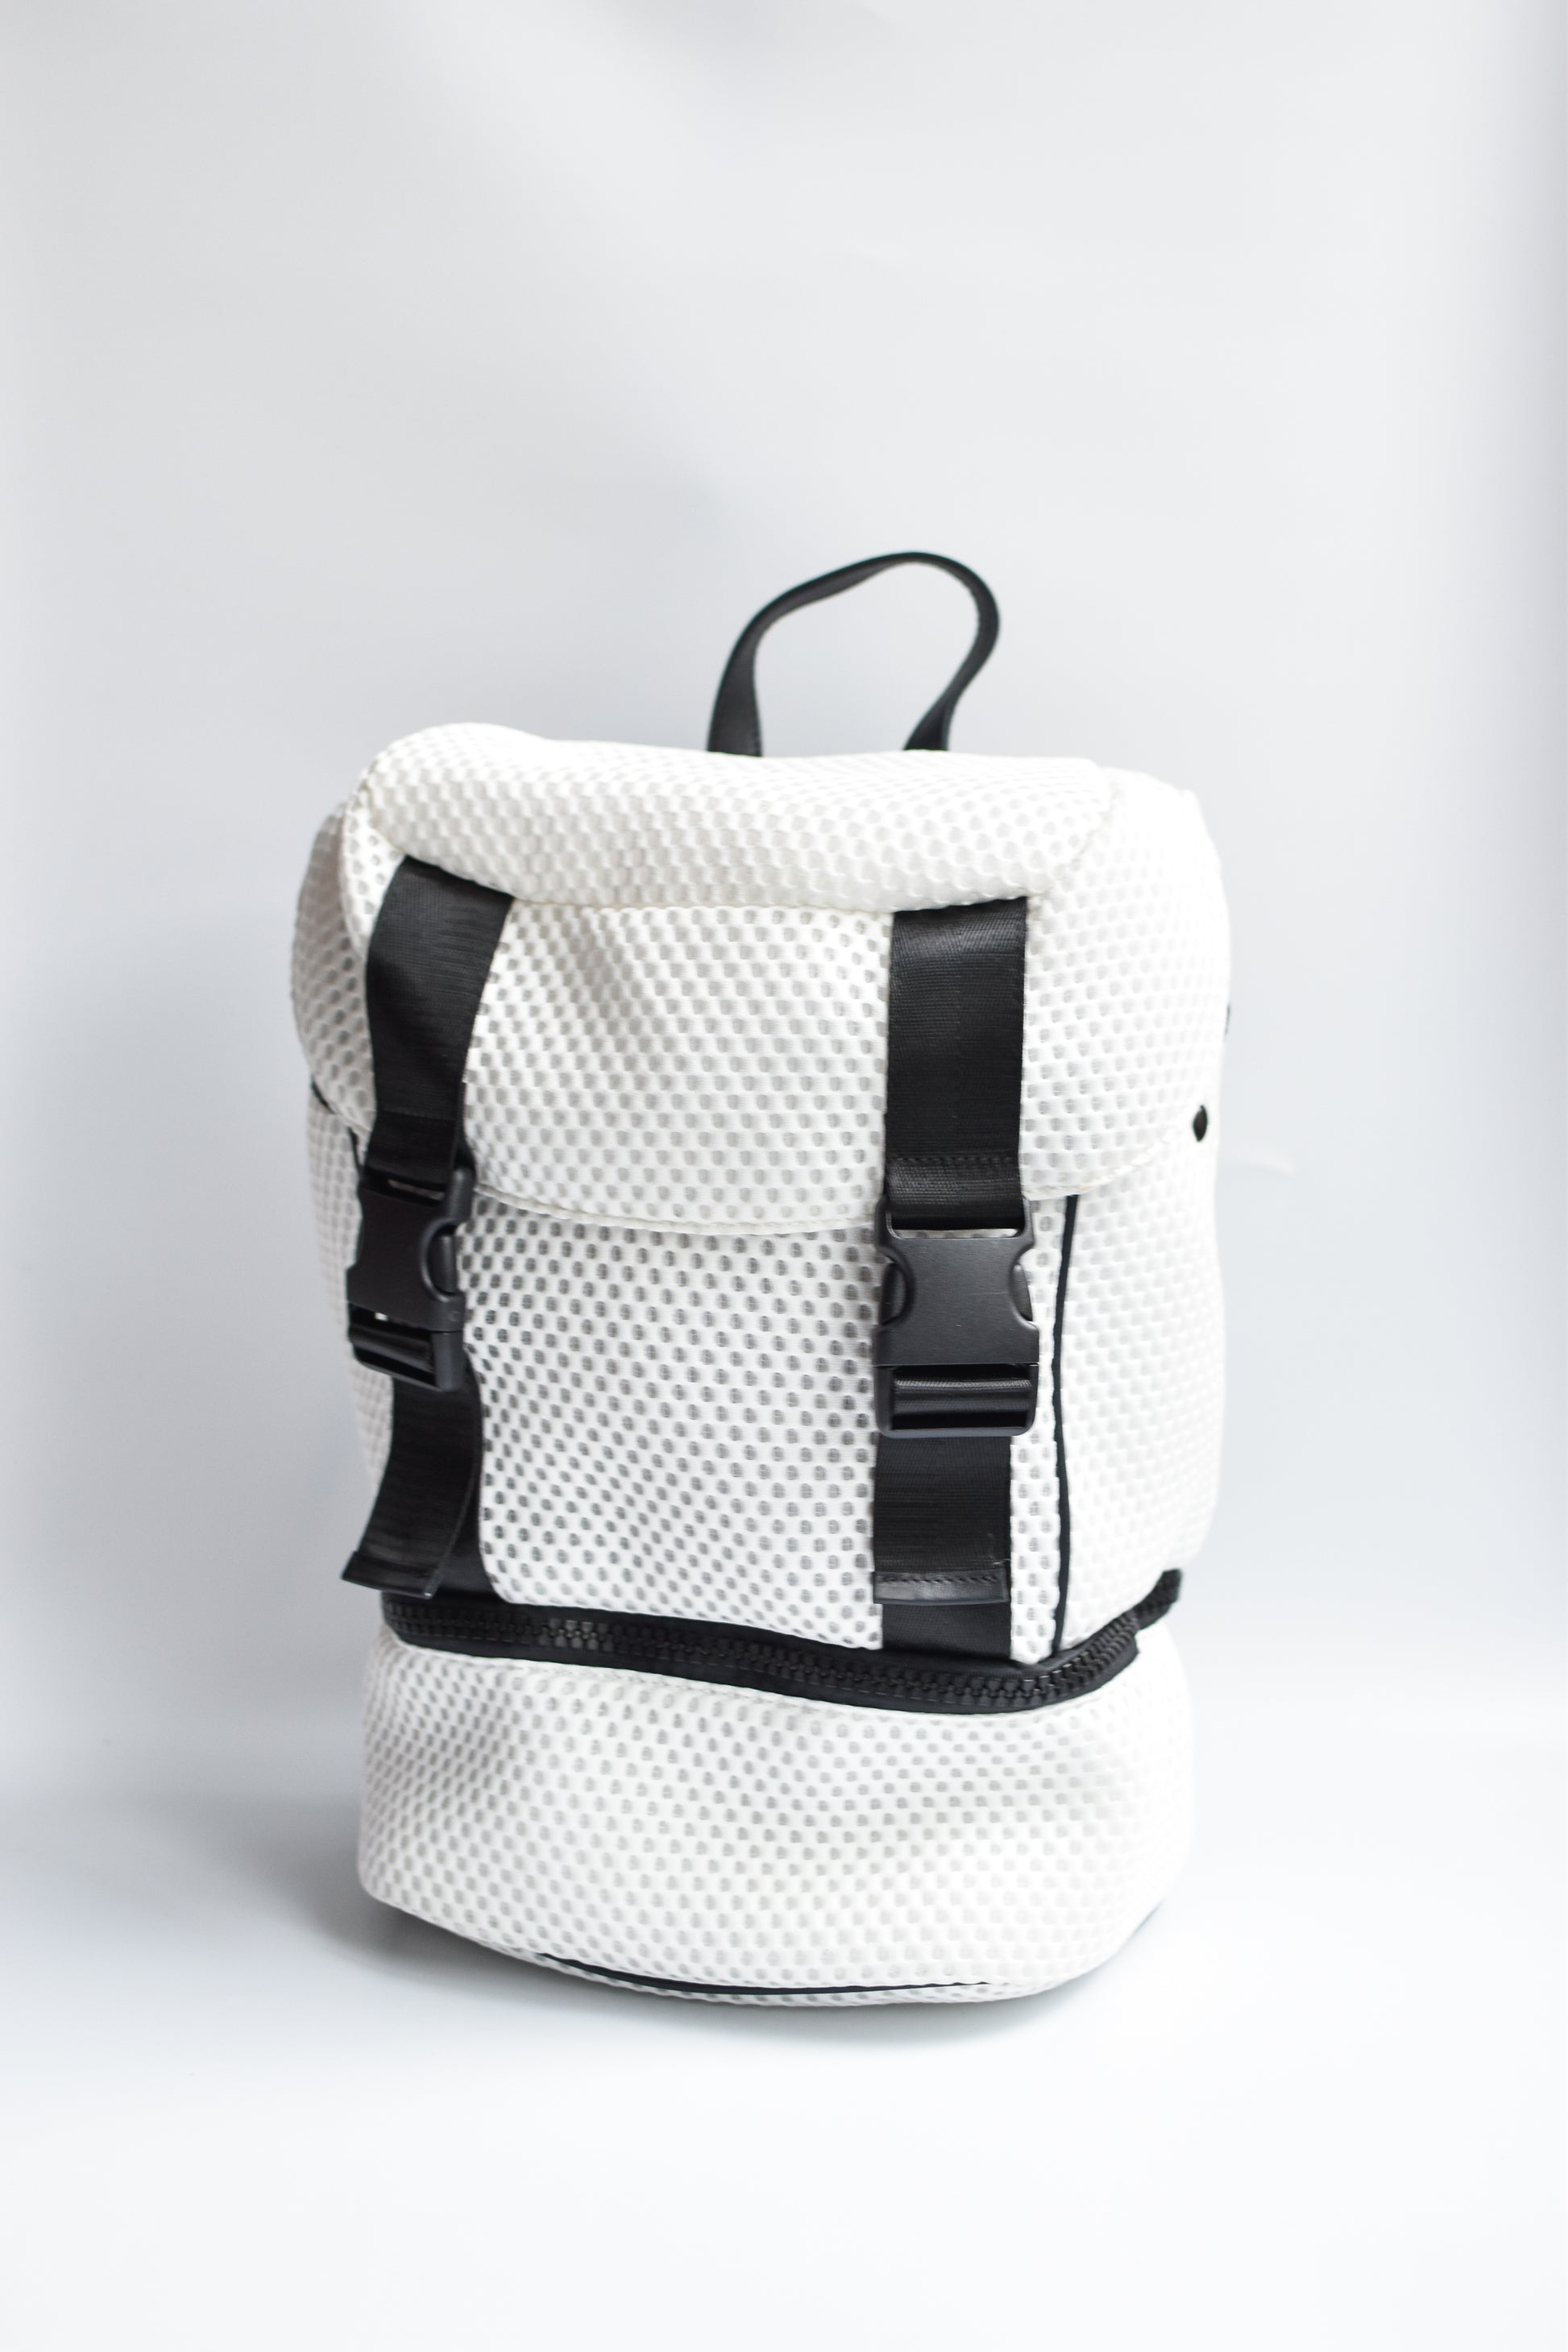 Brooker white mesh backpack with black front straps and bottom zipper compartment with black chunky zipper. 